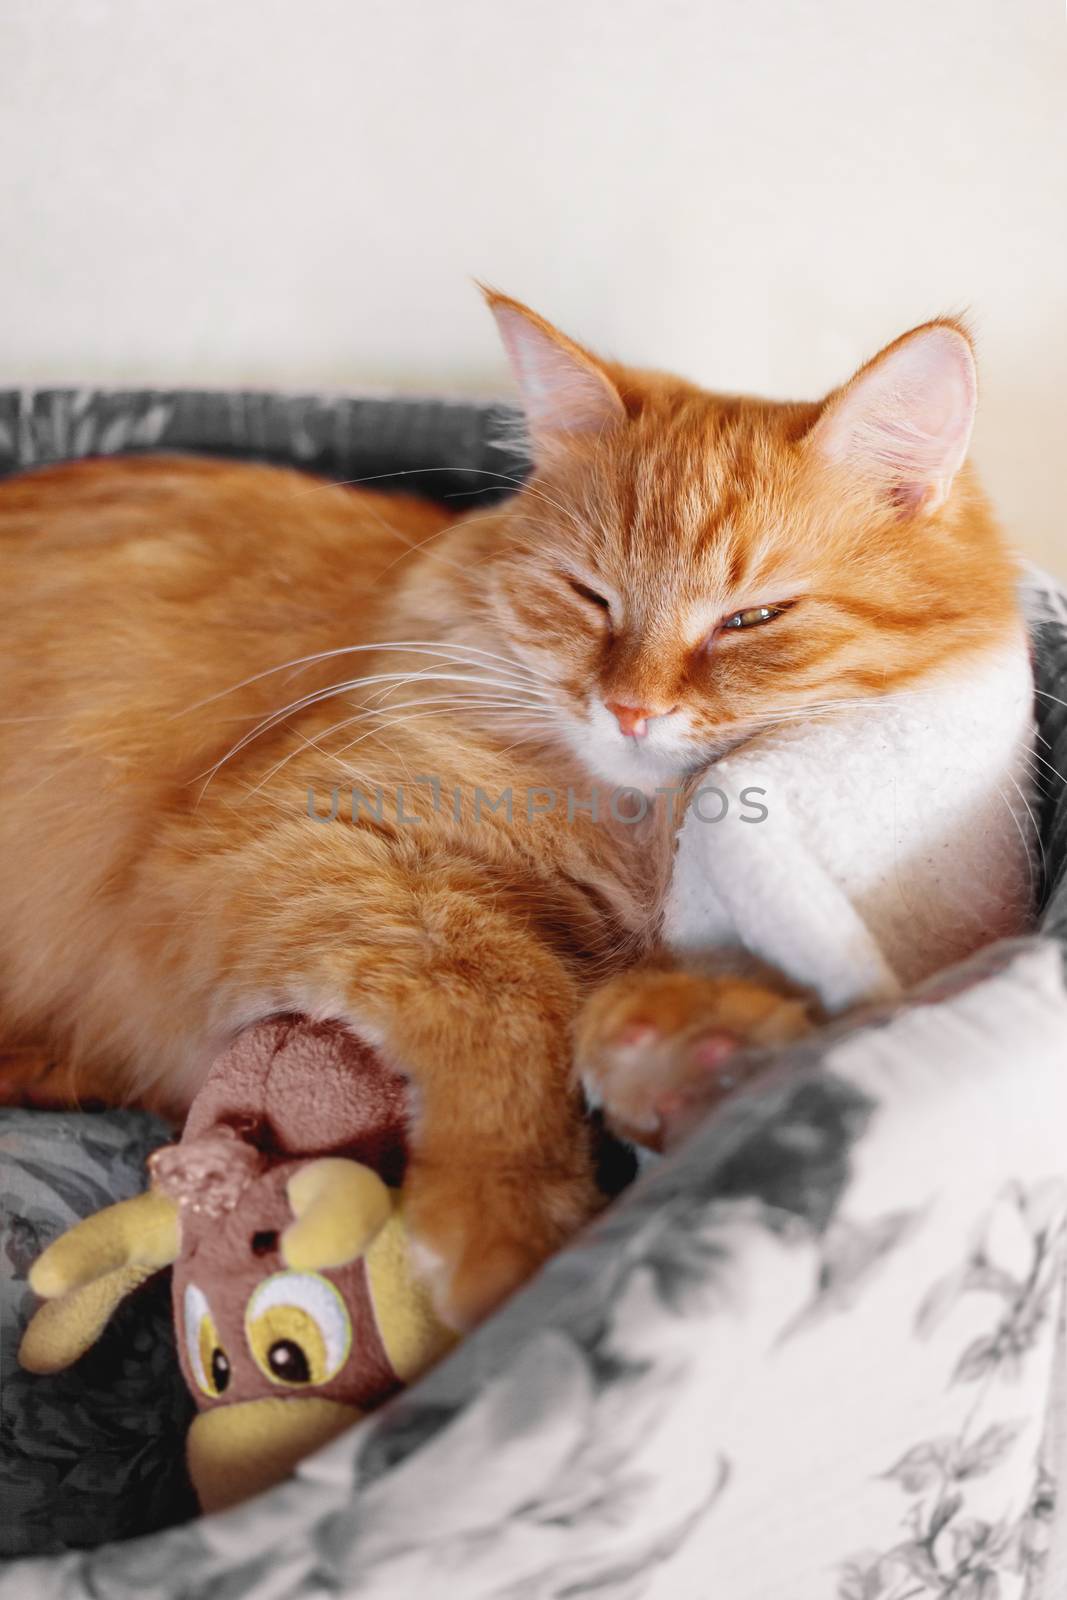 Cute ginger cat sleeping in soft fabric basket with toy. Fluffy pet in cozy home. Domestic animal relaxes.